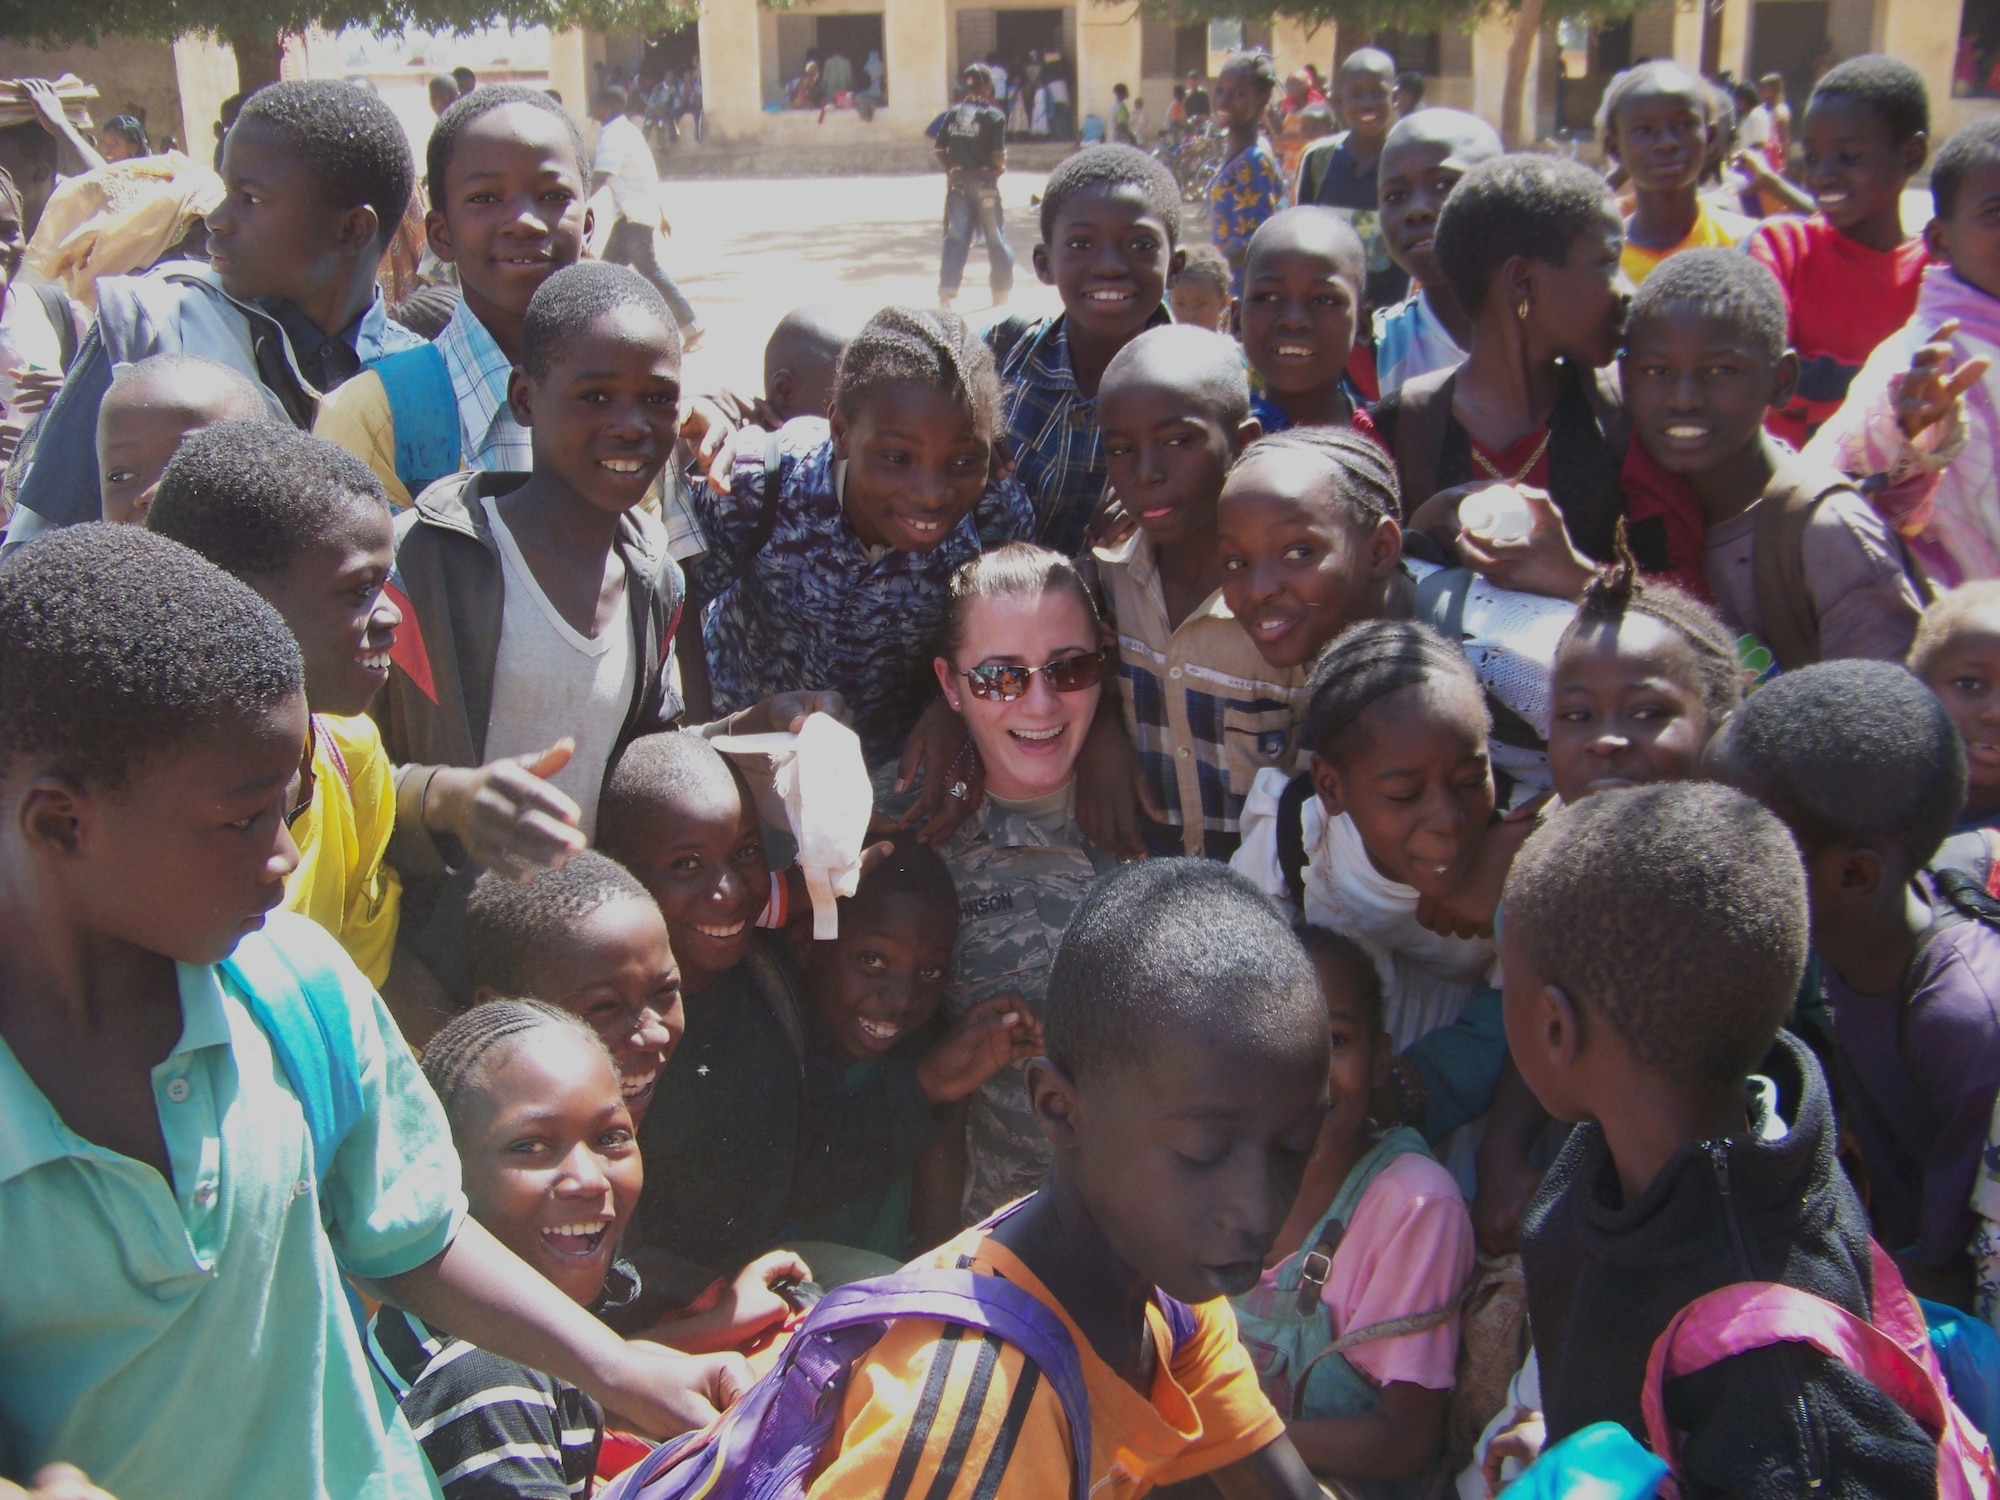 1st Lt. Lauren Johnson is surrounded by a group of African children recently at a school outside the airport in Bamako, Mali. Lt. Johnson was in Africa supporting FLINTLOCK, a training exercise featuring the United States and 15 African and Partner Nations designed to increase security and build capacity in the Trans-Saharan region. (U.S. Air Force photo/1st Lt. Jon Saas)